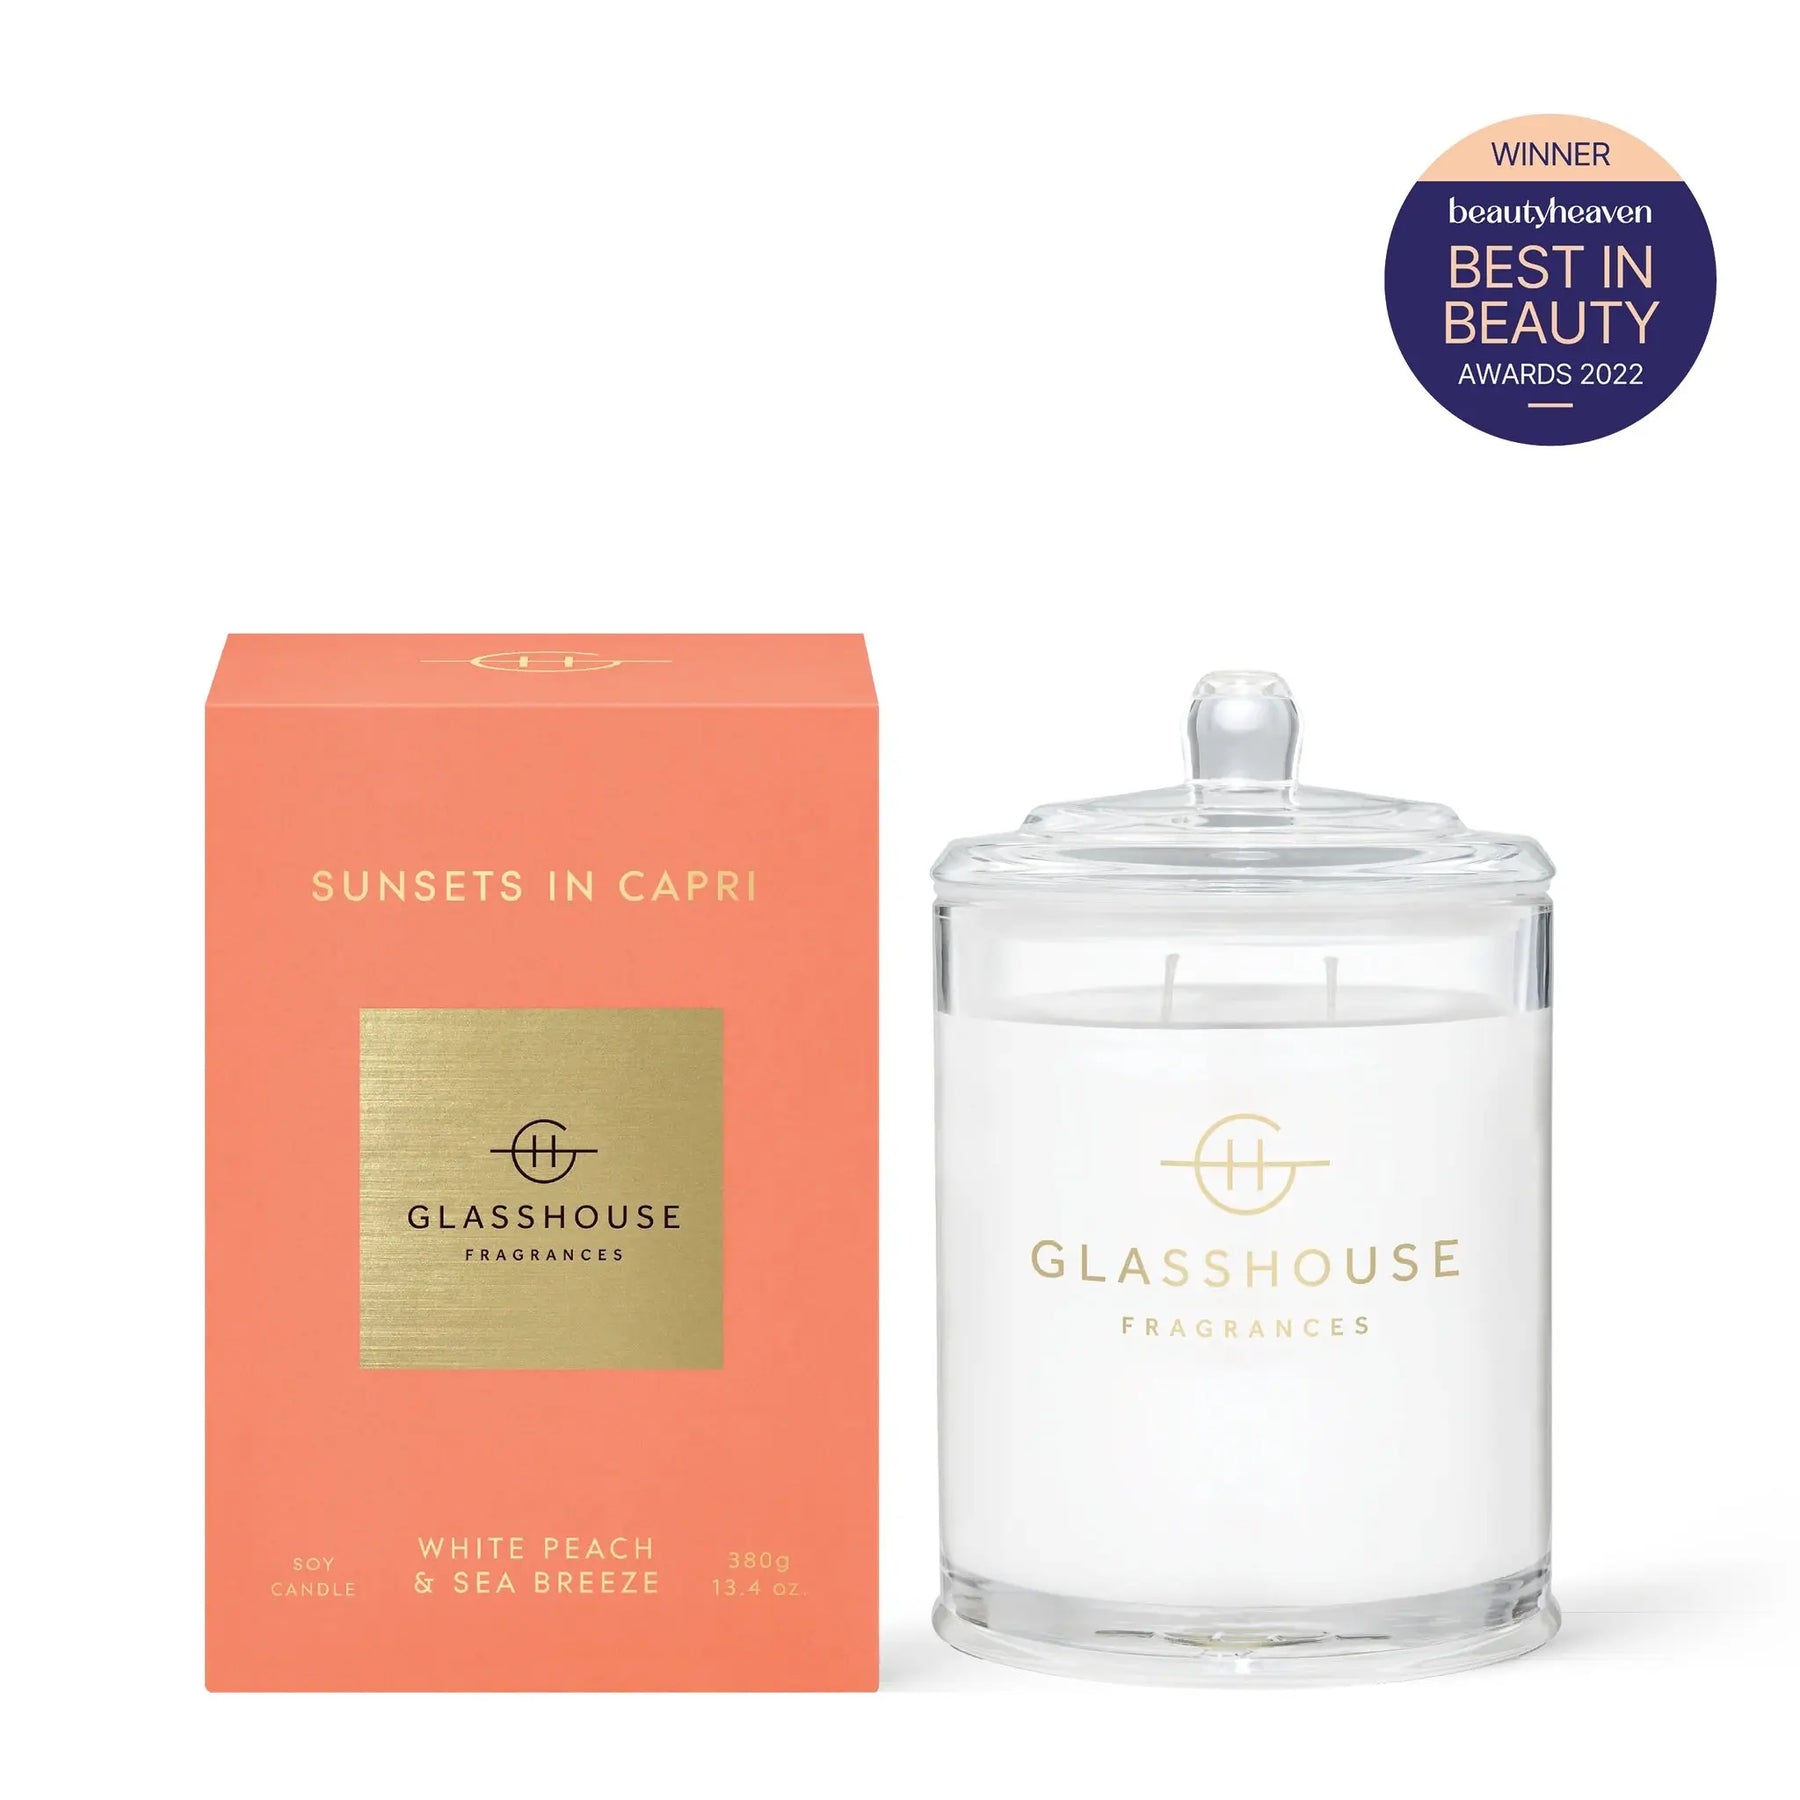 Glasshouse Fragrances Sunsets in Capri Soy Candle White Peach and Sea Breeze 380 grams 13.4 ounces Winner Beautyheaven Best in beauty awards 2022